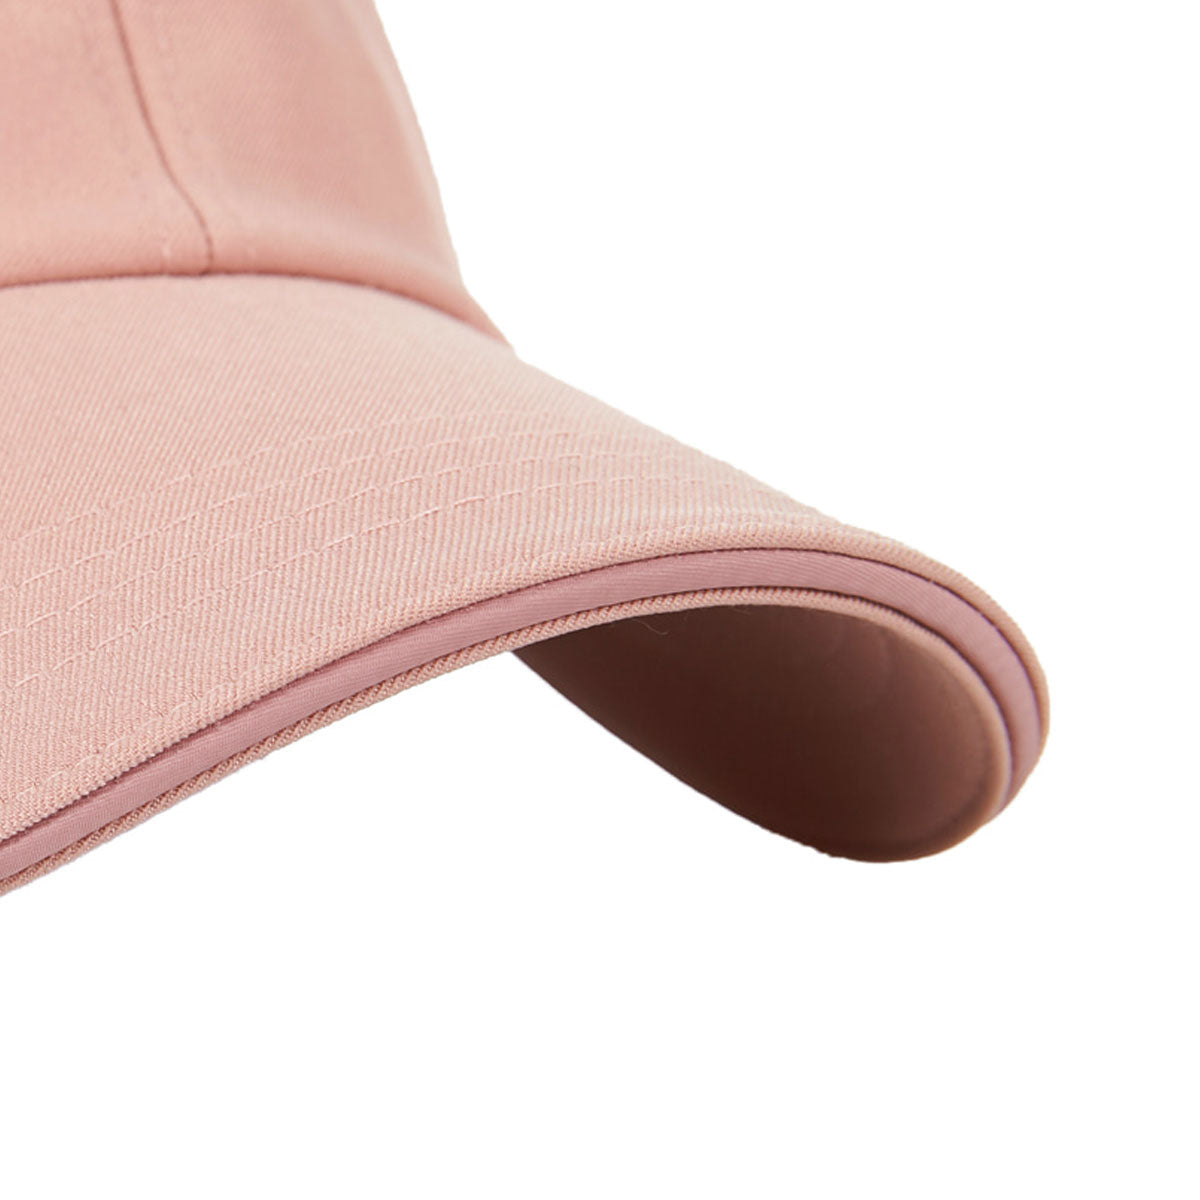 VARZAR - SILVER STUD OVER FIT BALL CAP PINK【VZR4-0006】